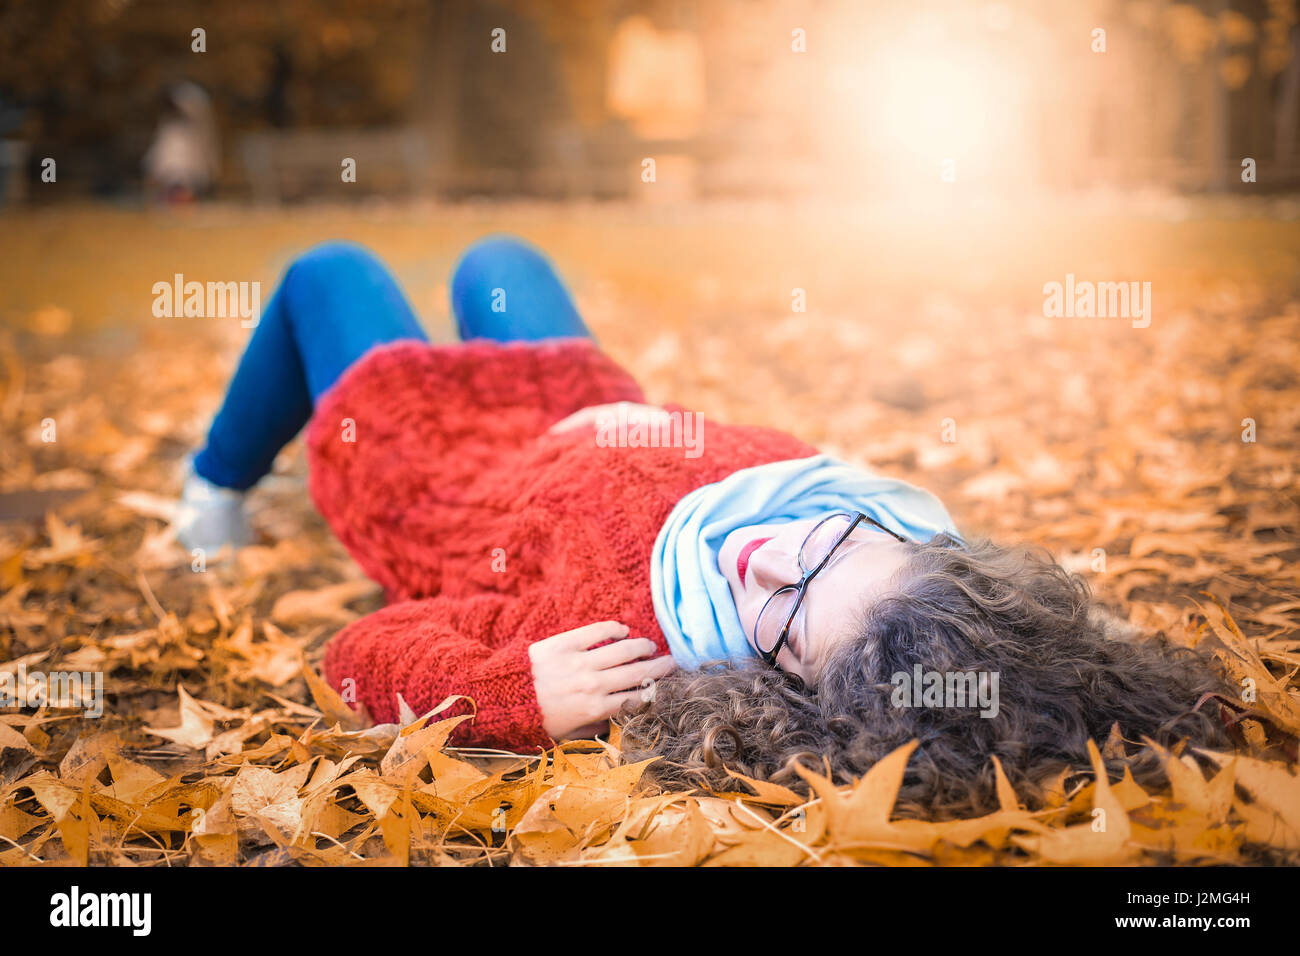 Woman with glasses laying in leaves Stock Photo